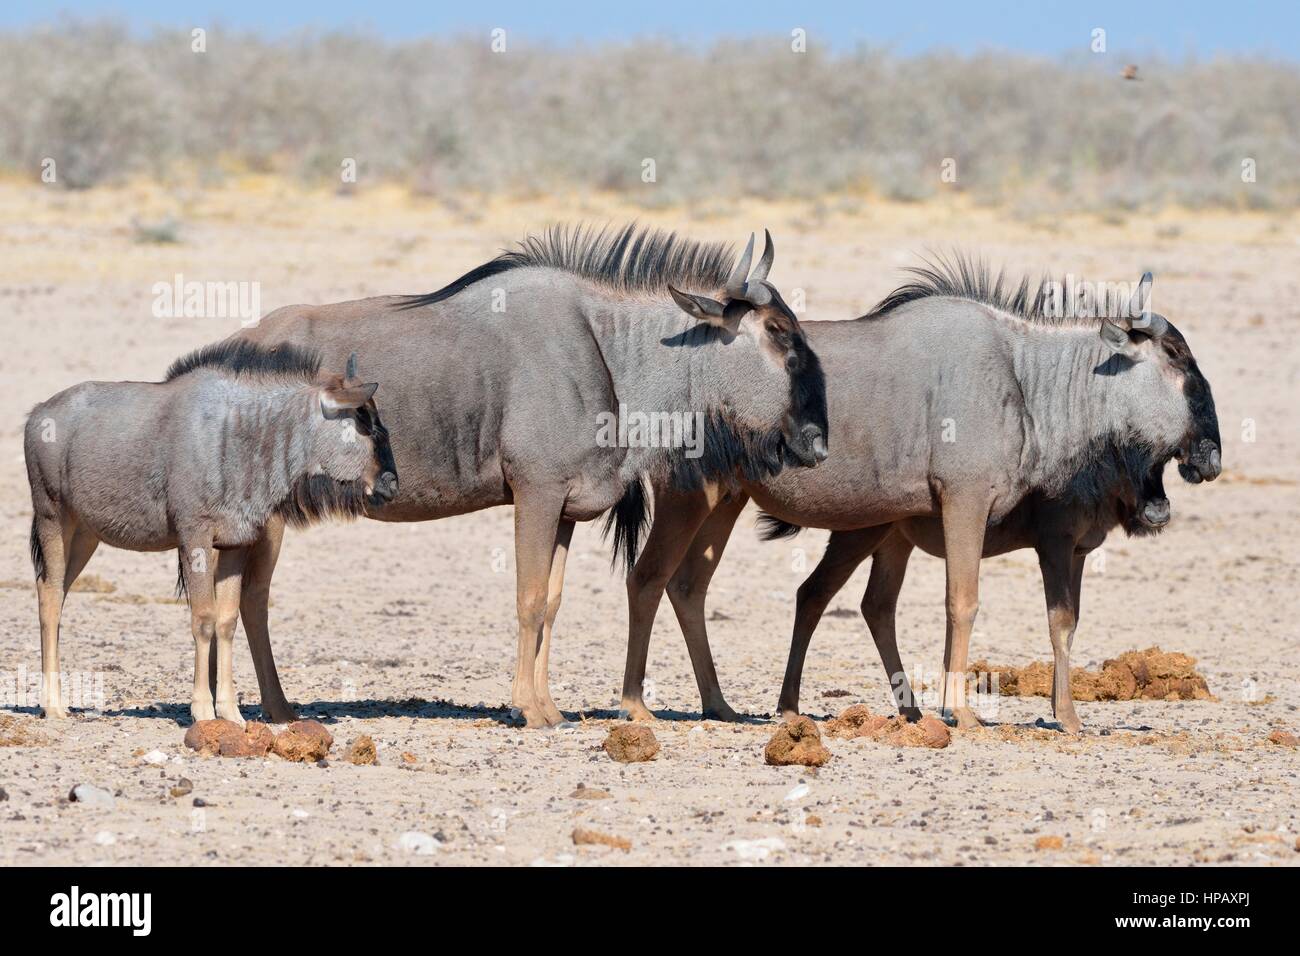 Blue wildebeests (Connochaetes taurinus), two adults and two young standing on arid ground, Etosha National Park, Namibia, Africa Stock Photo